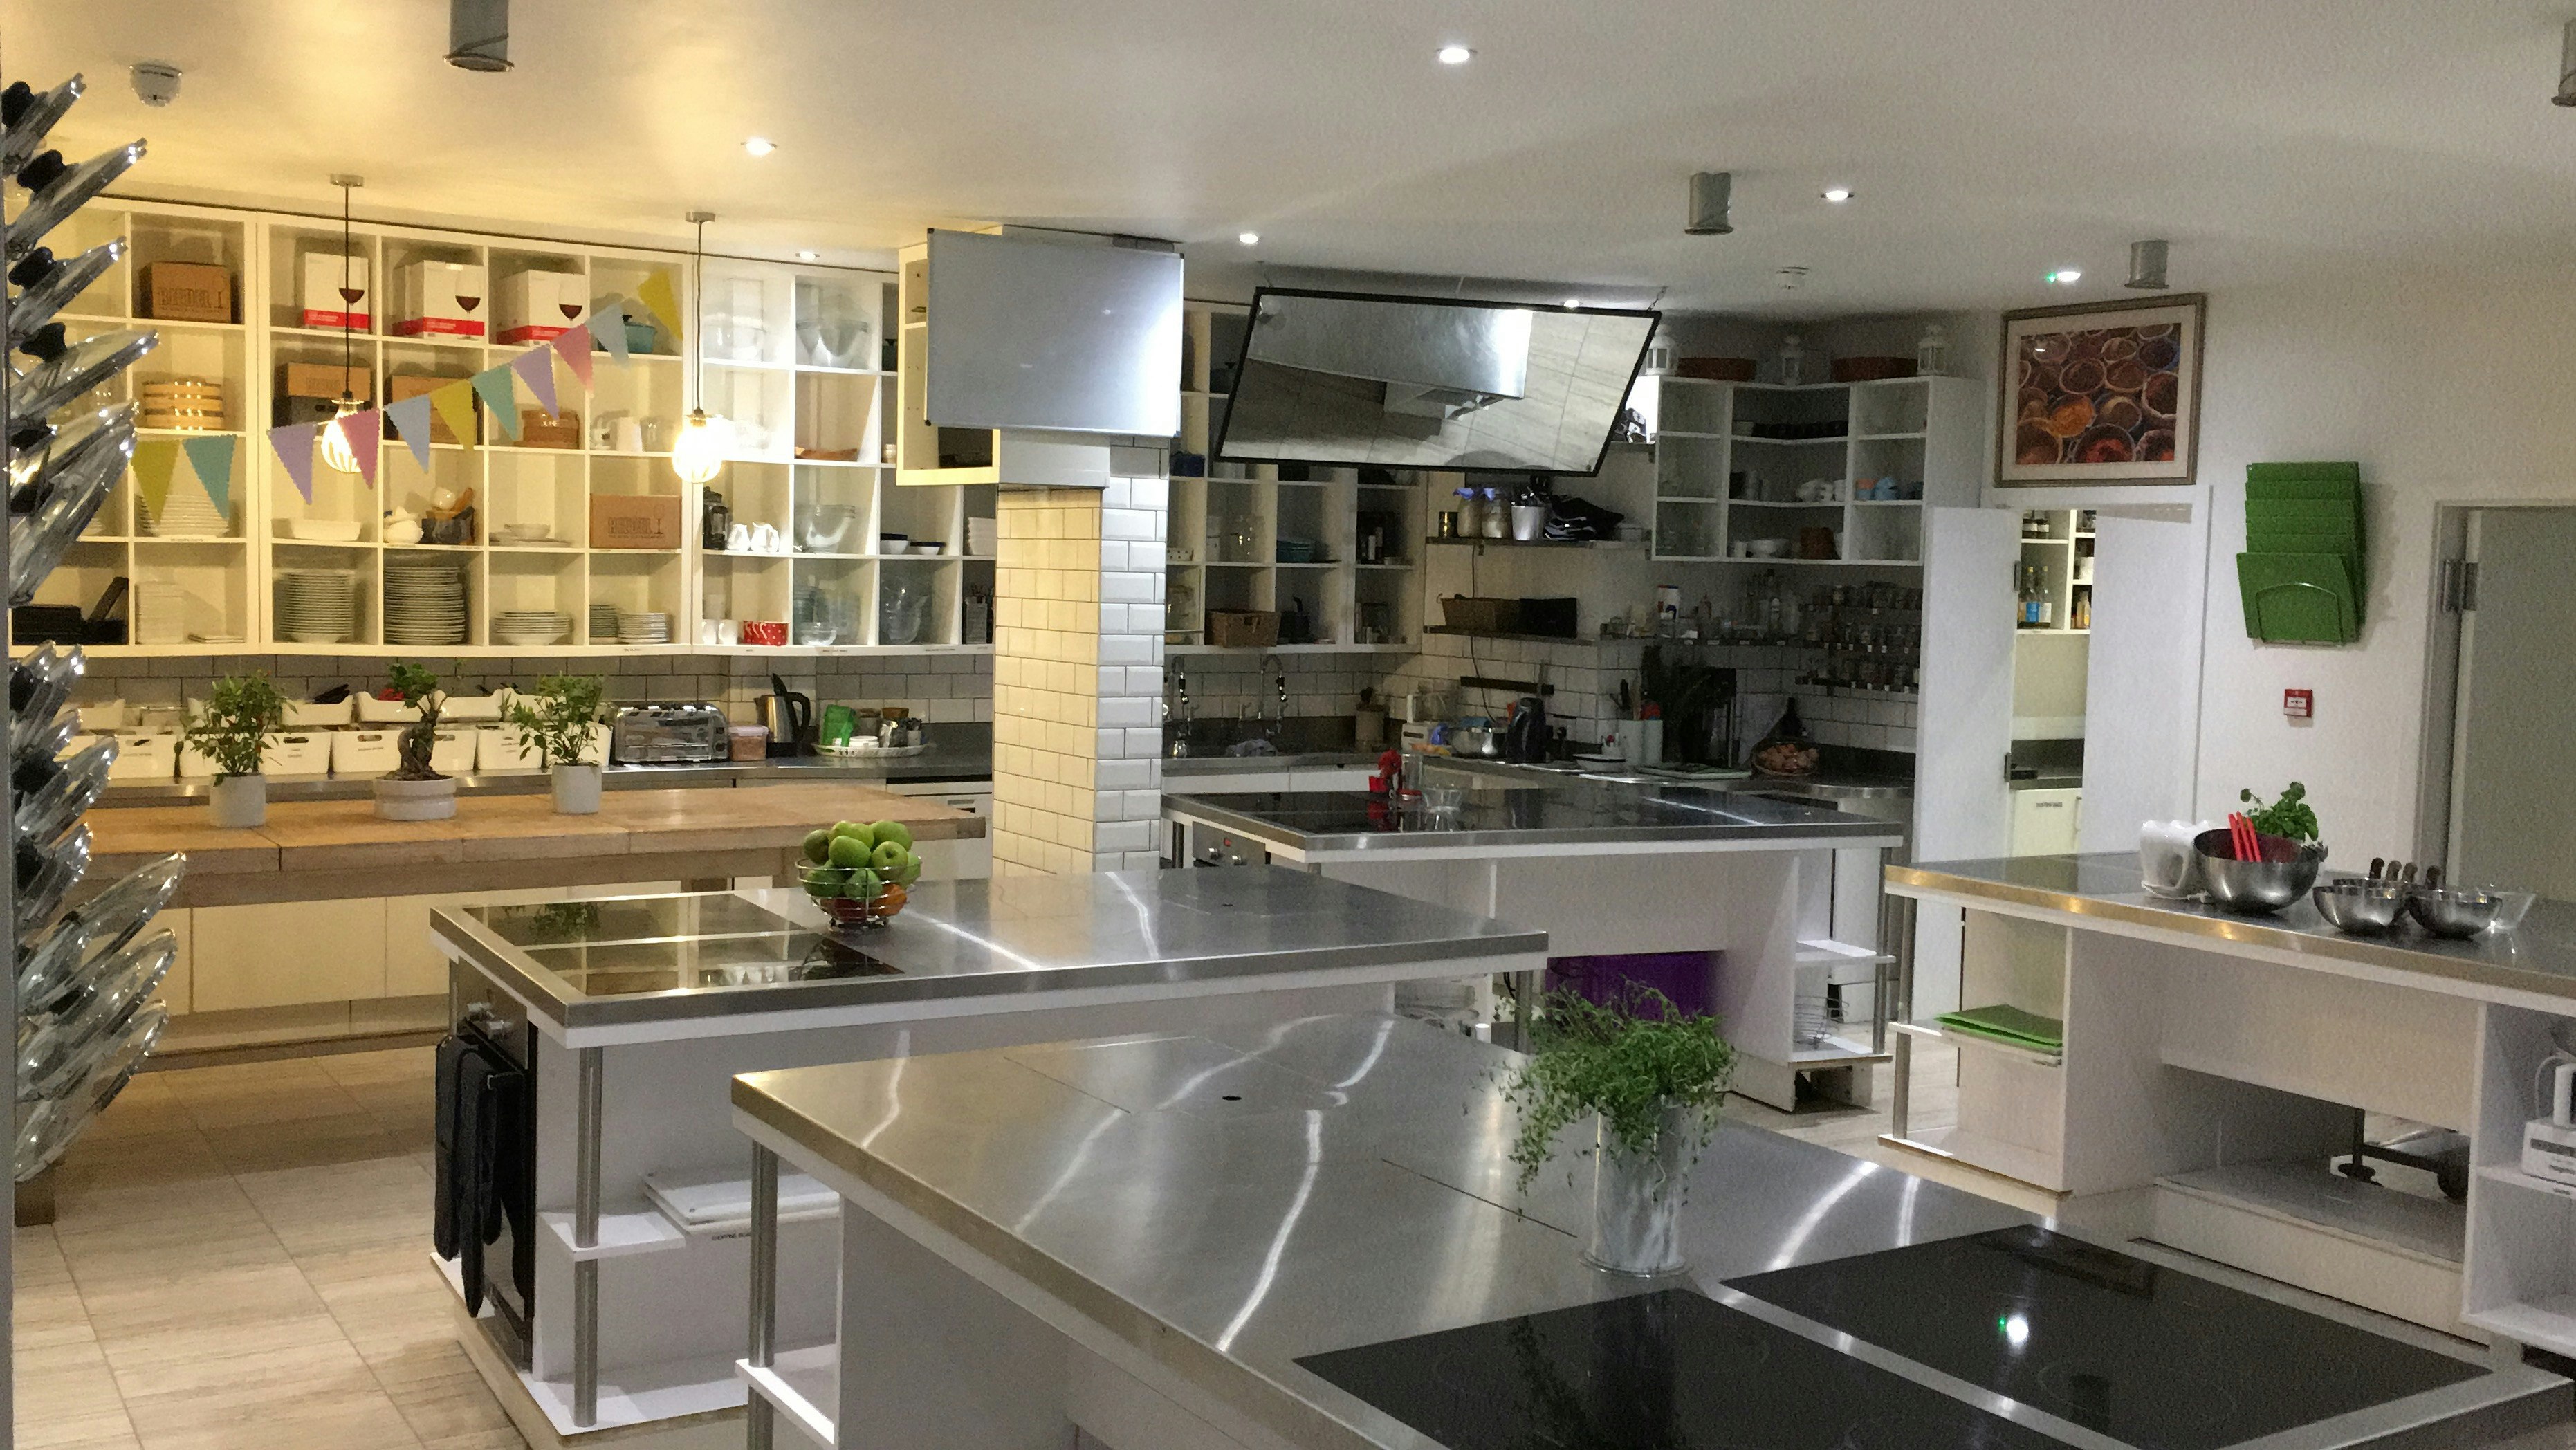 Complete Kitchen @ The Avenue Cookery School - Professional Kitchen to rent & hire image 8